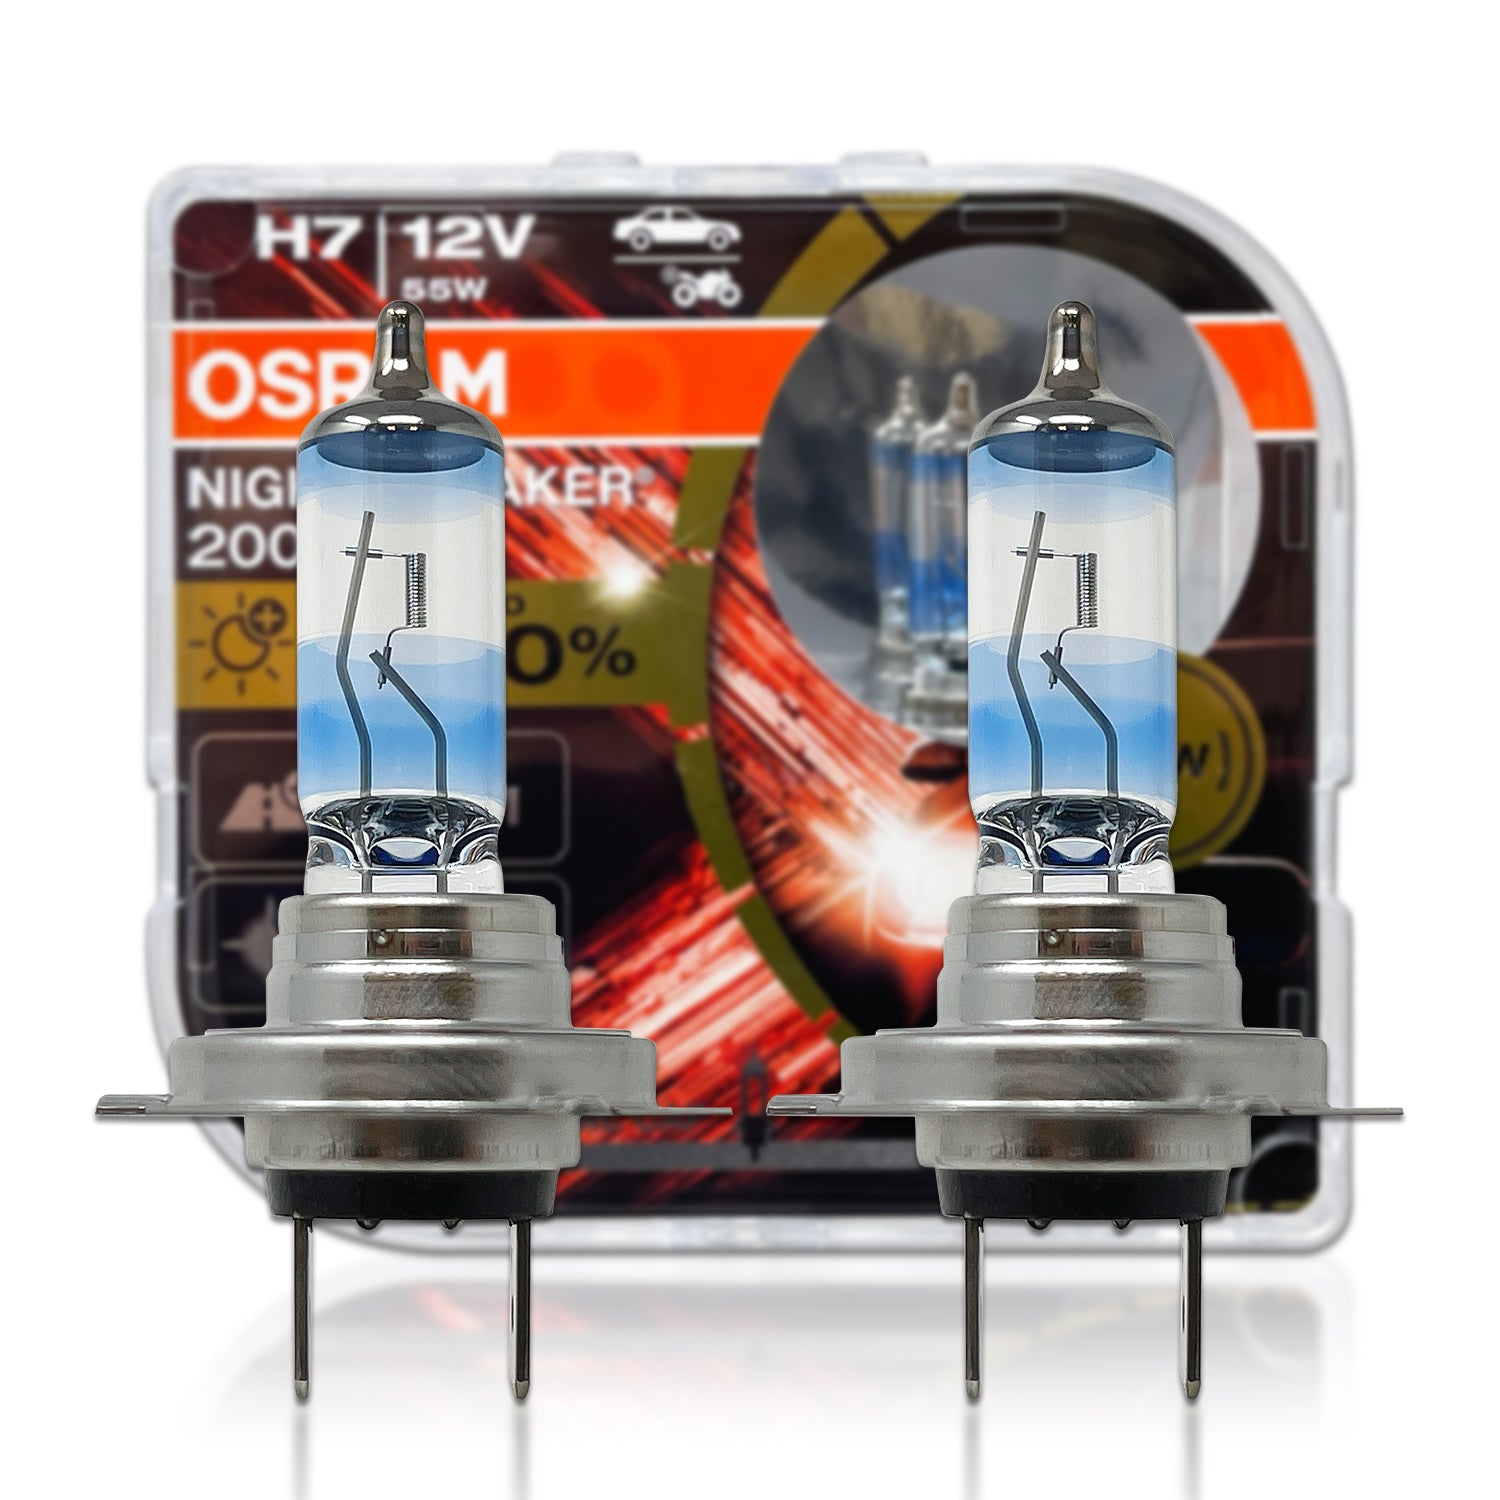 OSRAM NIGHT BREAKER 200 H7 The brightest halogen automotive light UNBOXING,  INSTALLATION AND TEST 